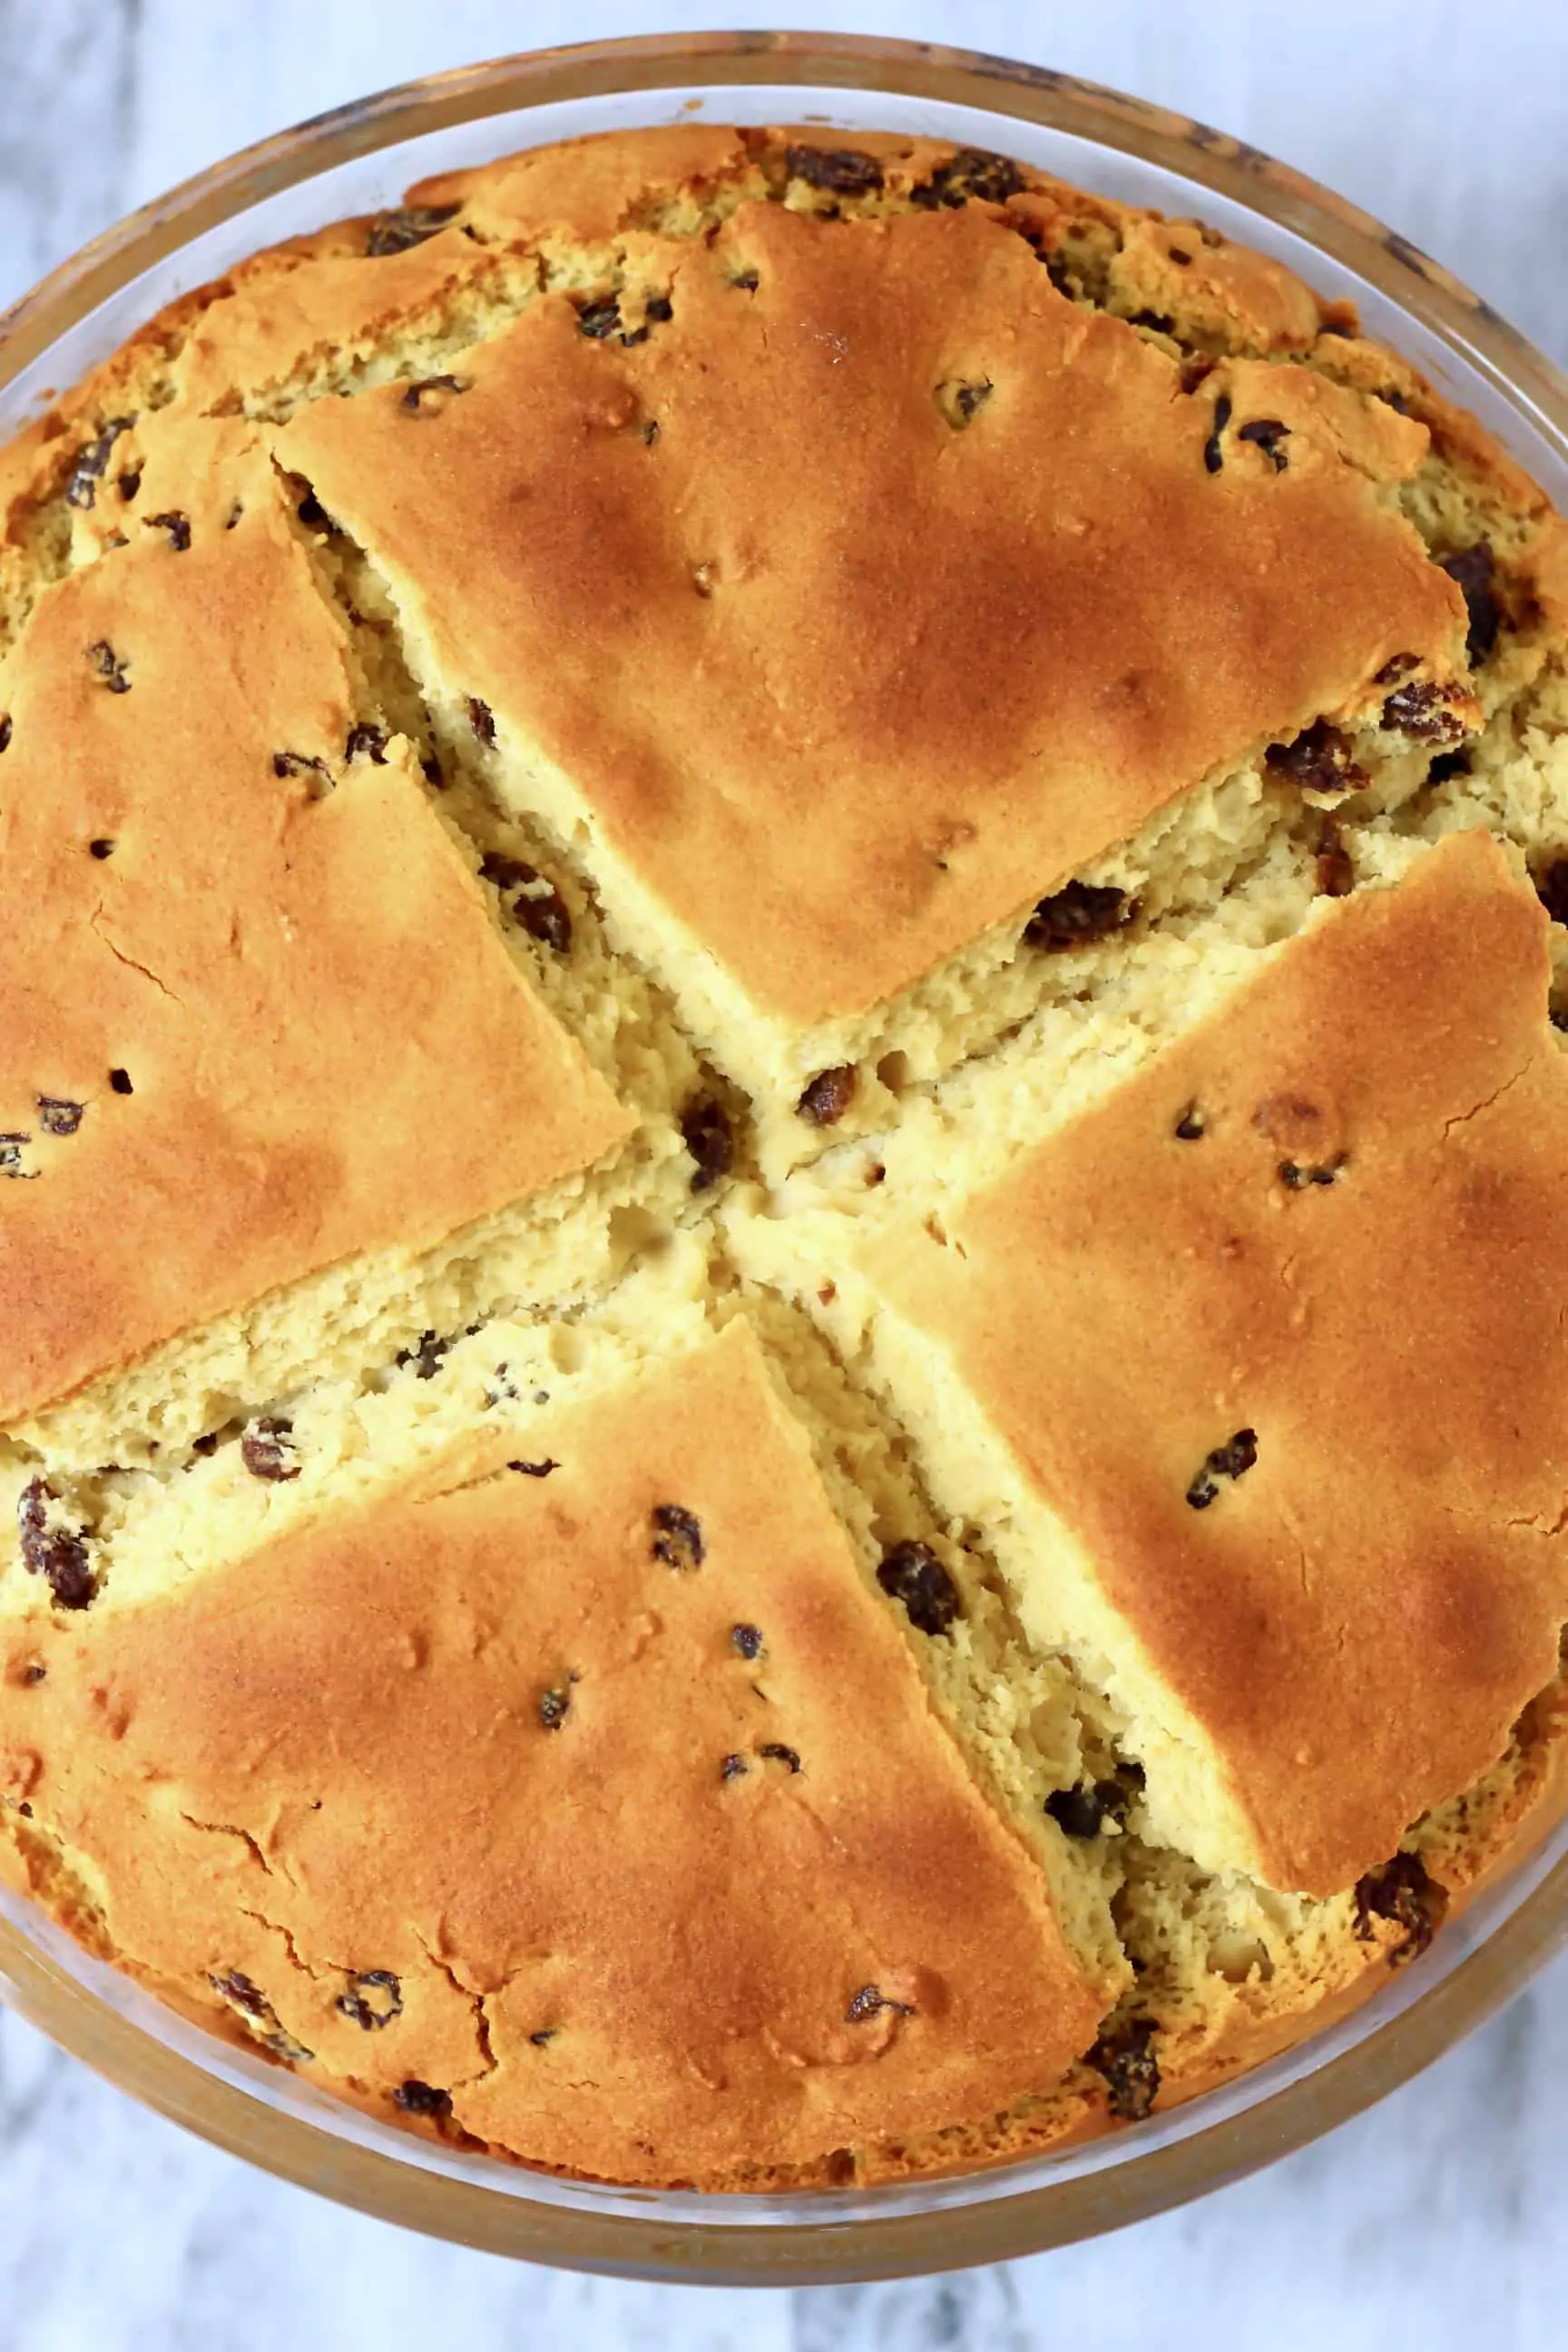 A round loaf of Gluten-Free Vegan Irish Soda Bread with a cross on top in a glass baking dish